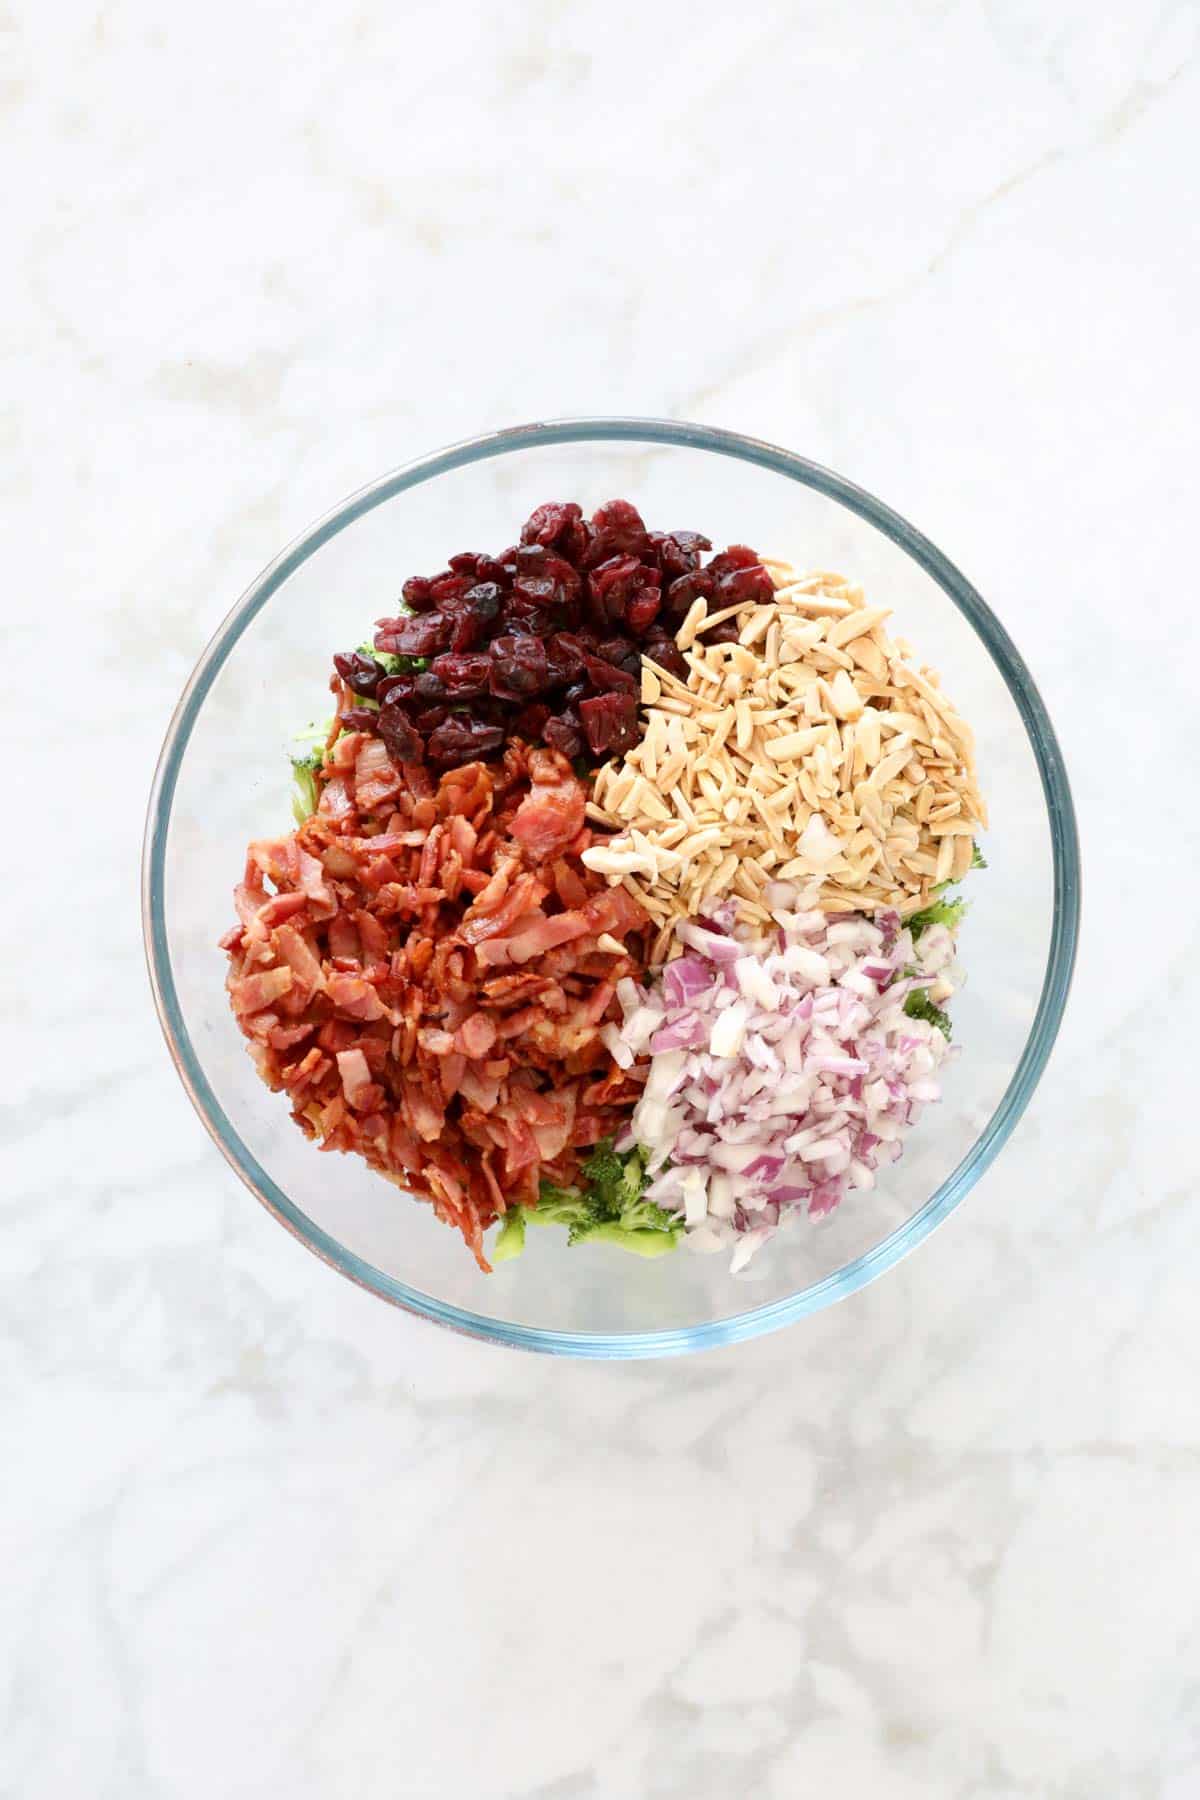 Crispy bacon, broccoli, dried cranberries, slivered almonds and diced red onions in a glass bowl.